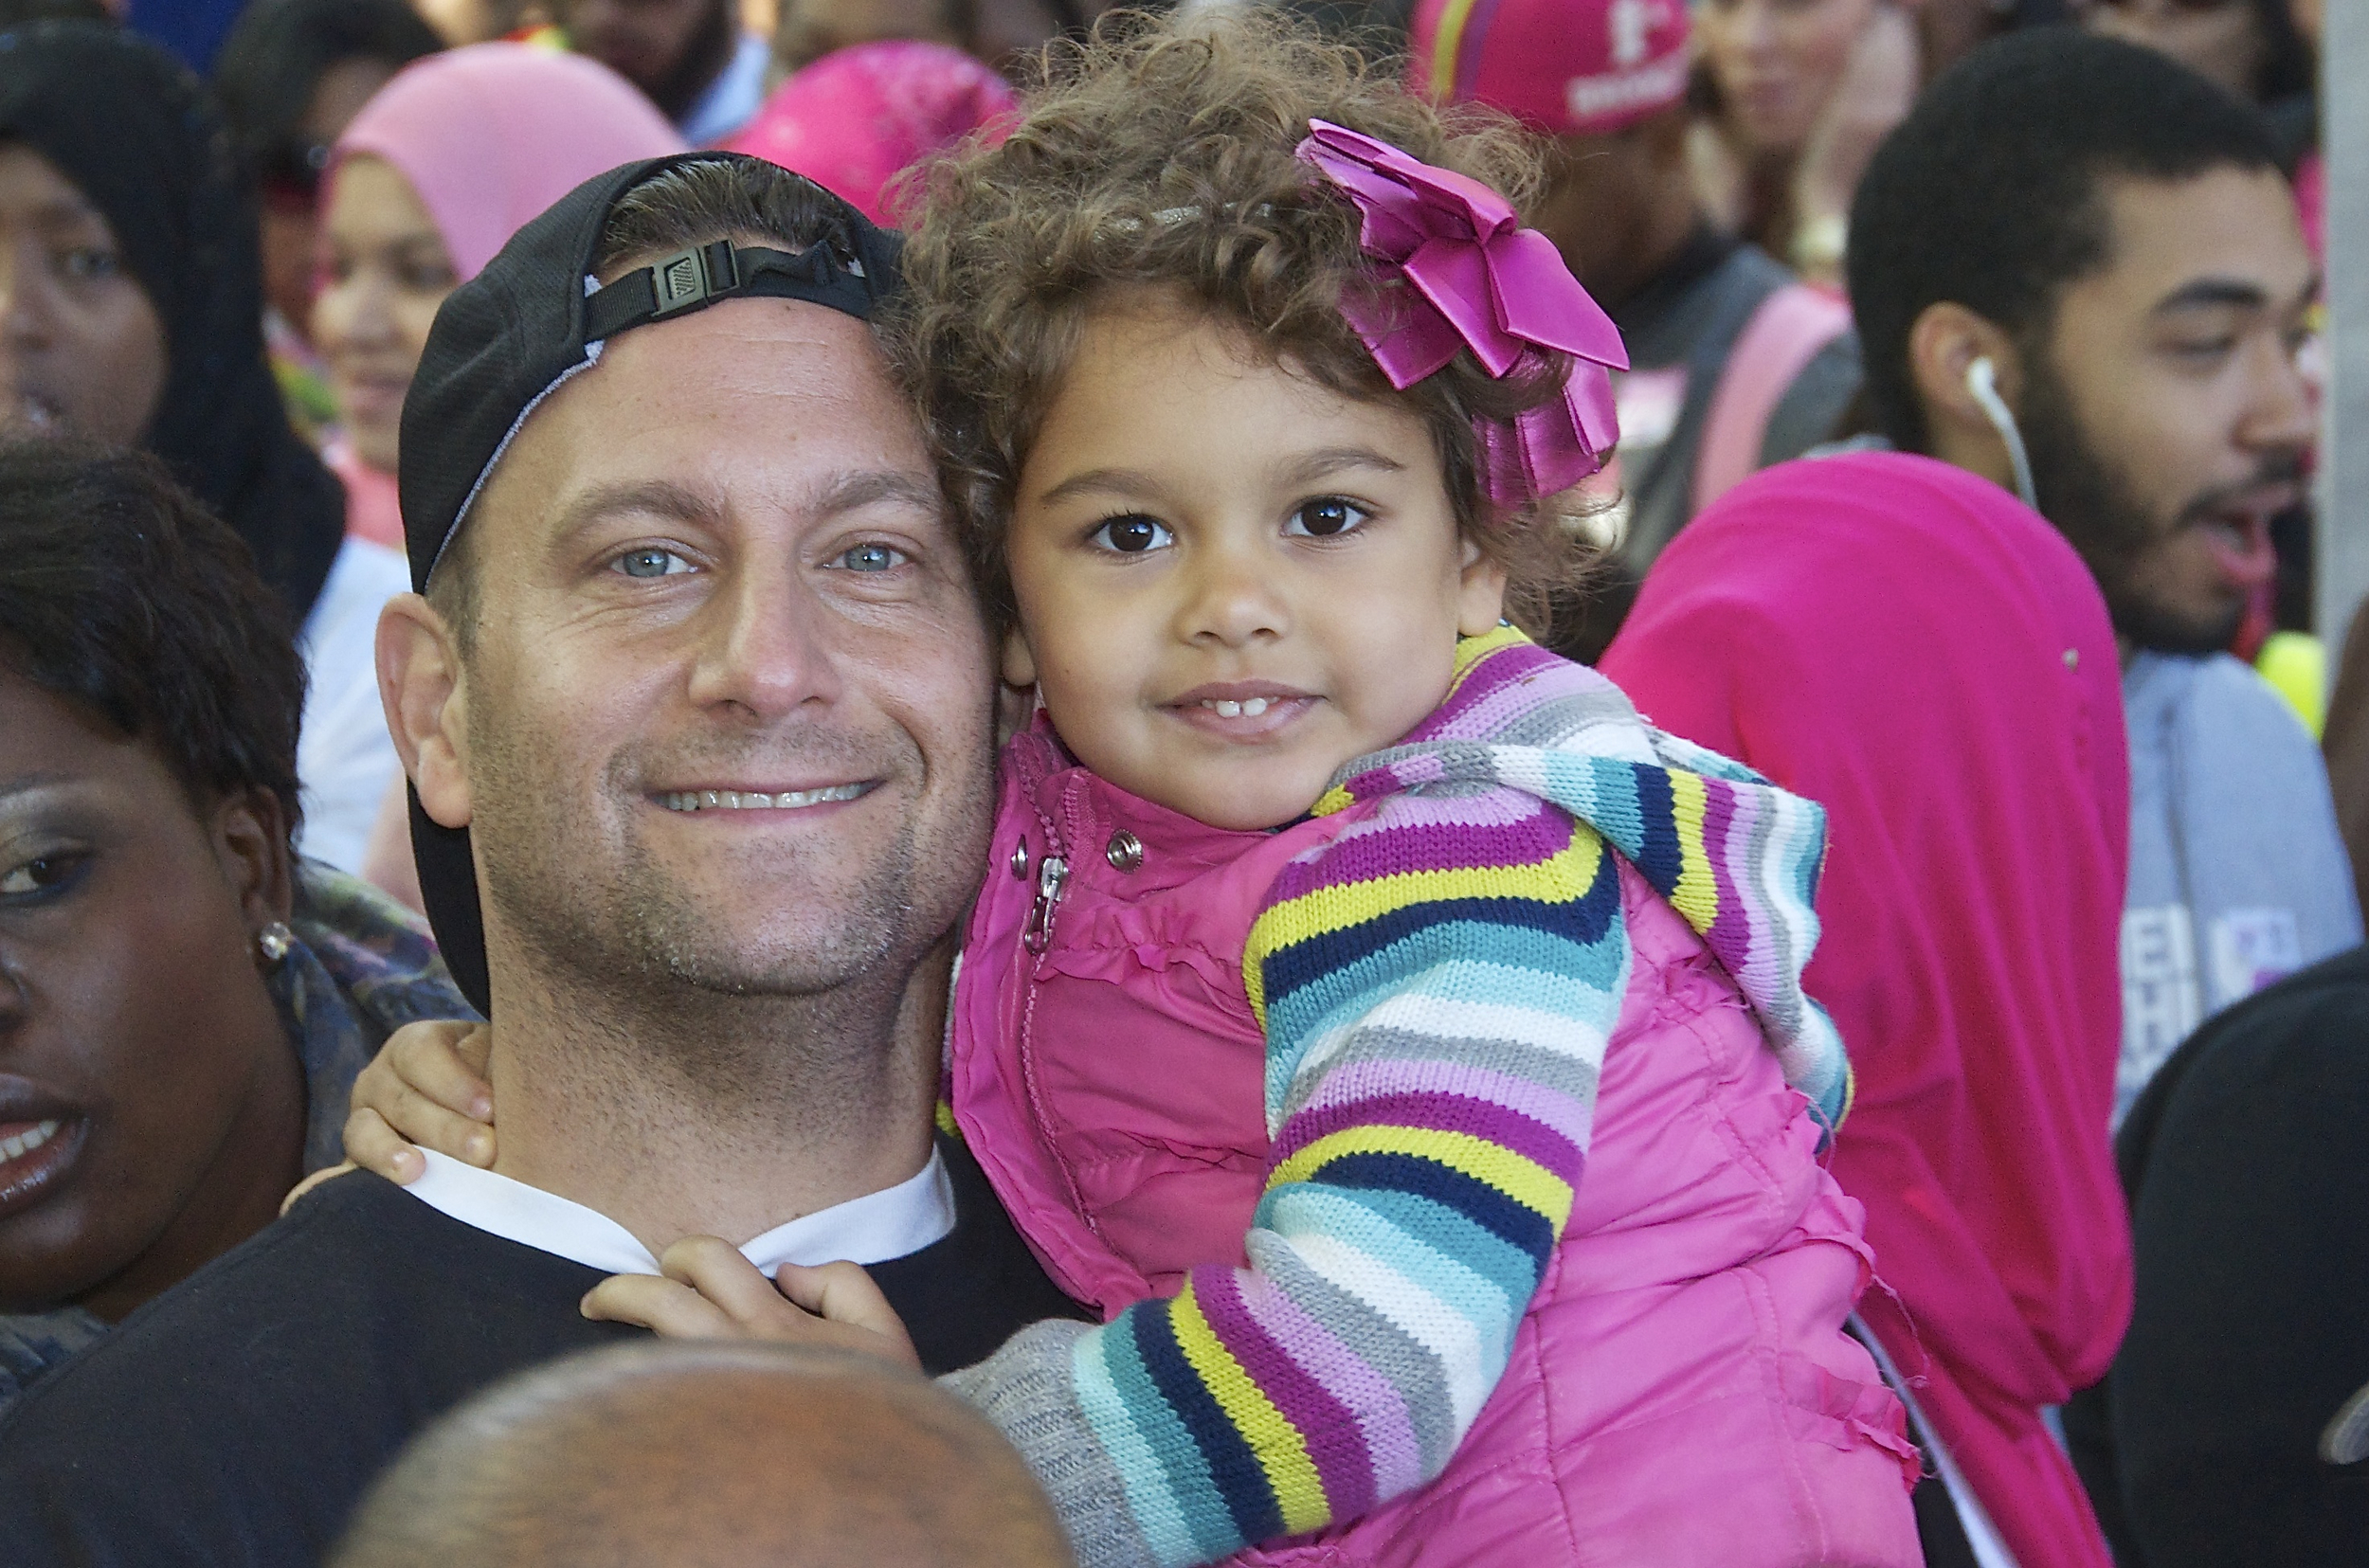 Making Strides Against Breast Cancer--Central Park, American Cancer Society, NYC.